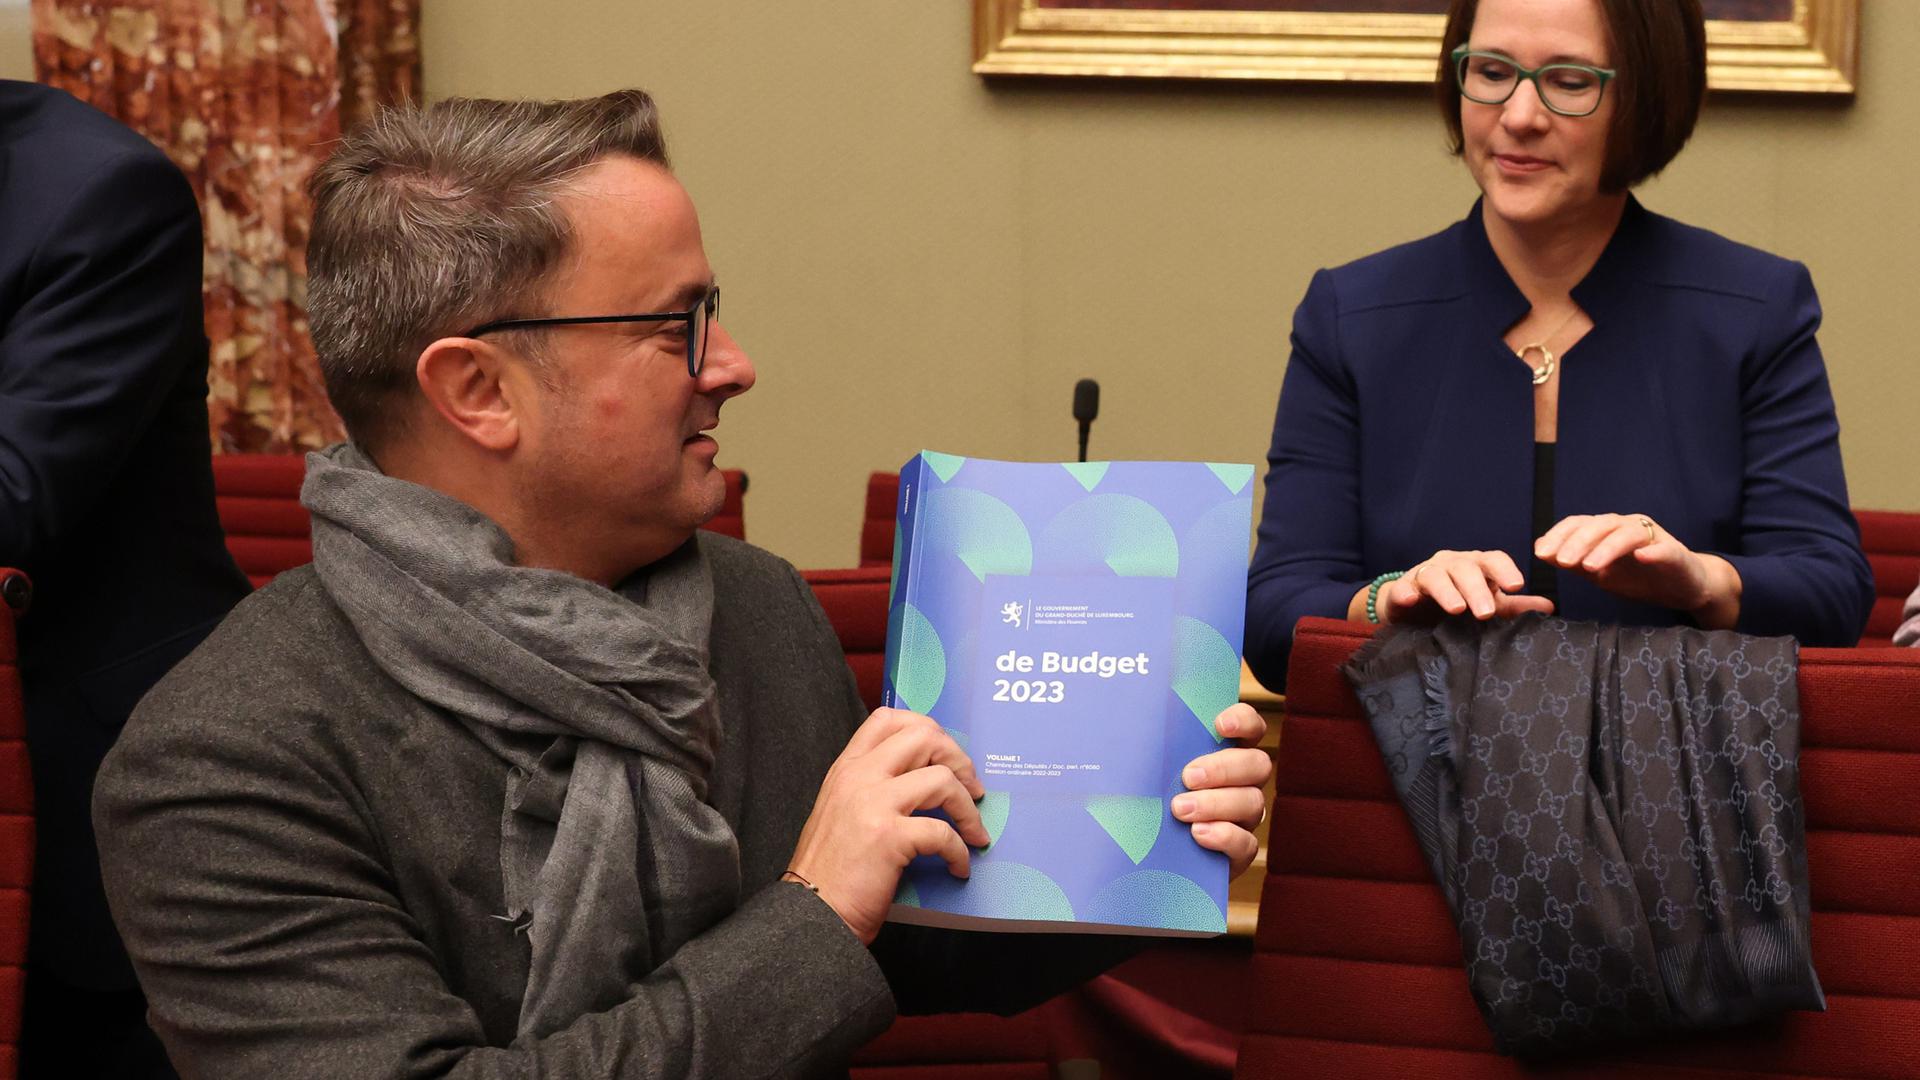 Yuriko Backes and Xavier Bettel with the proposed budget